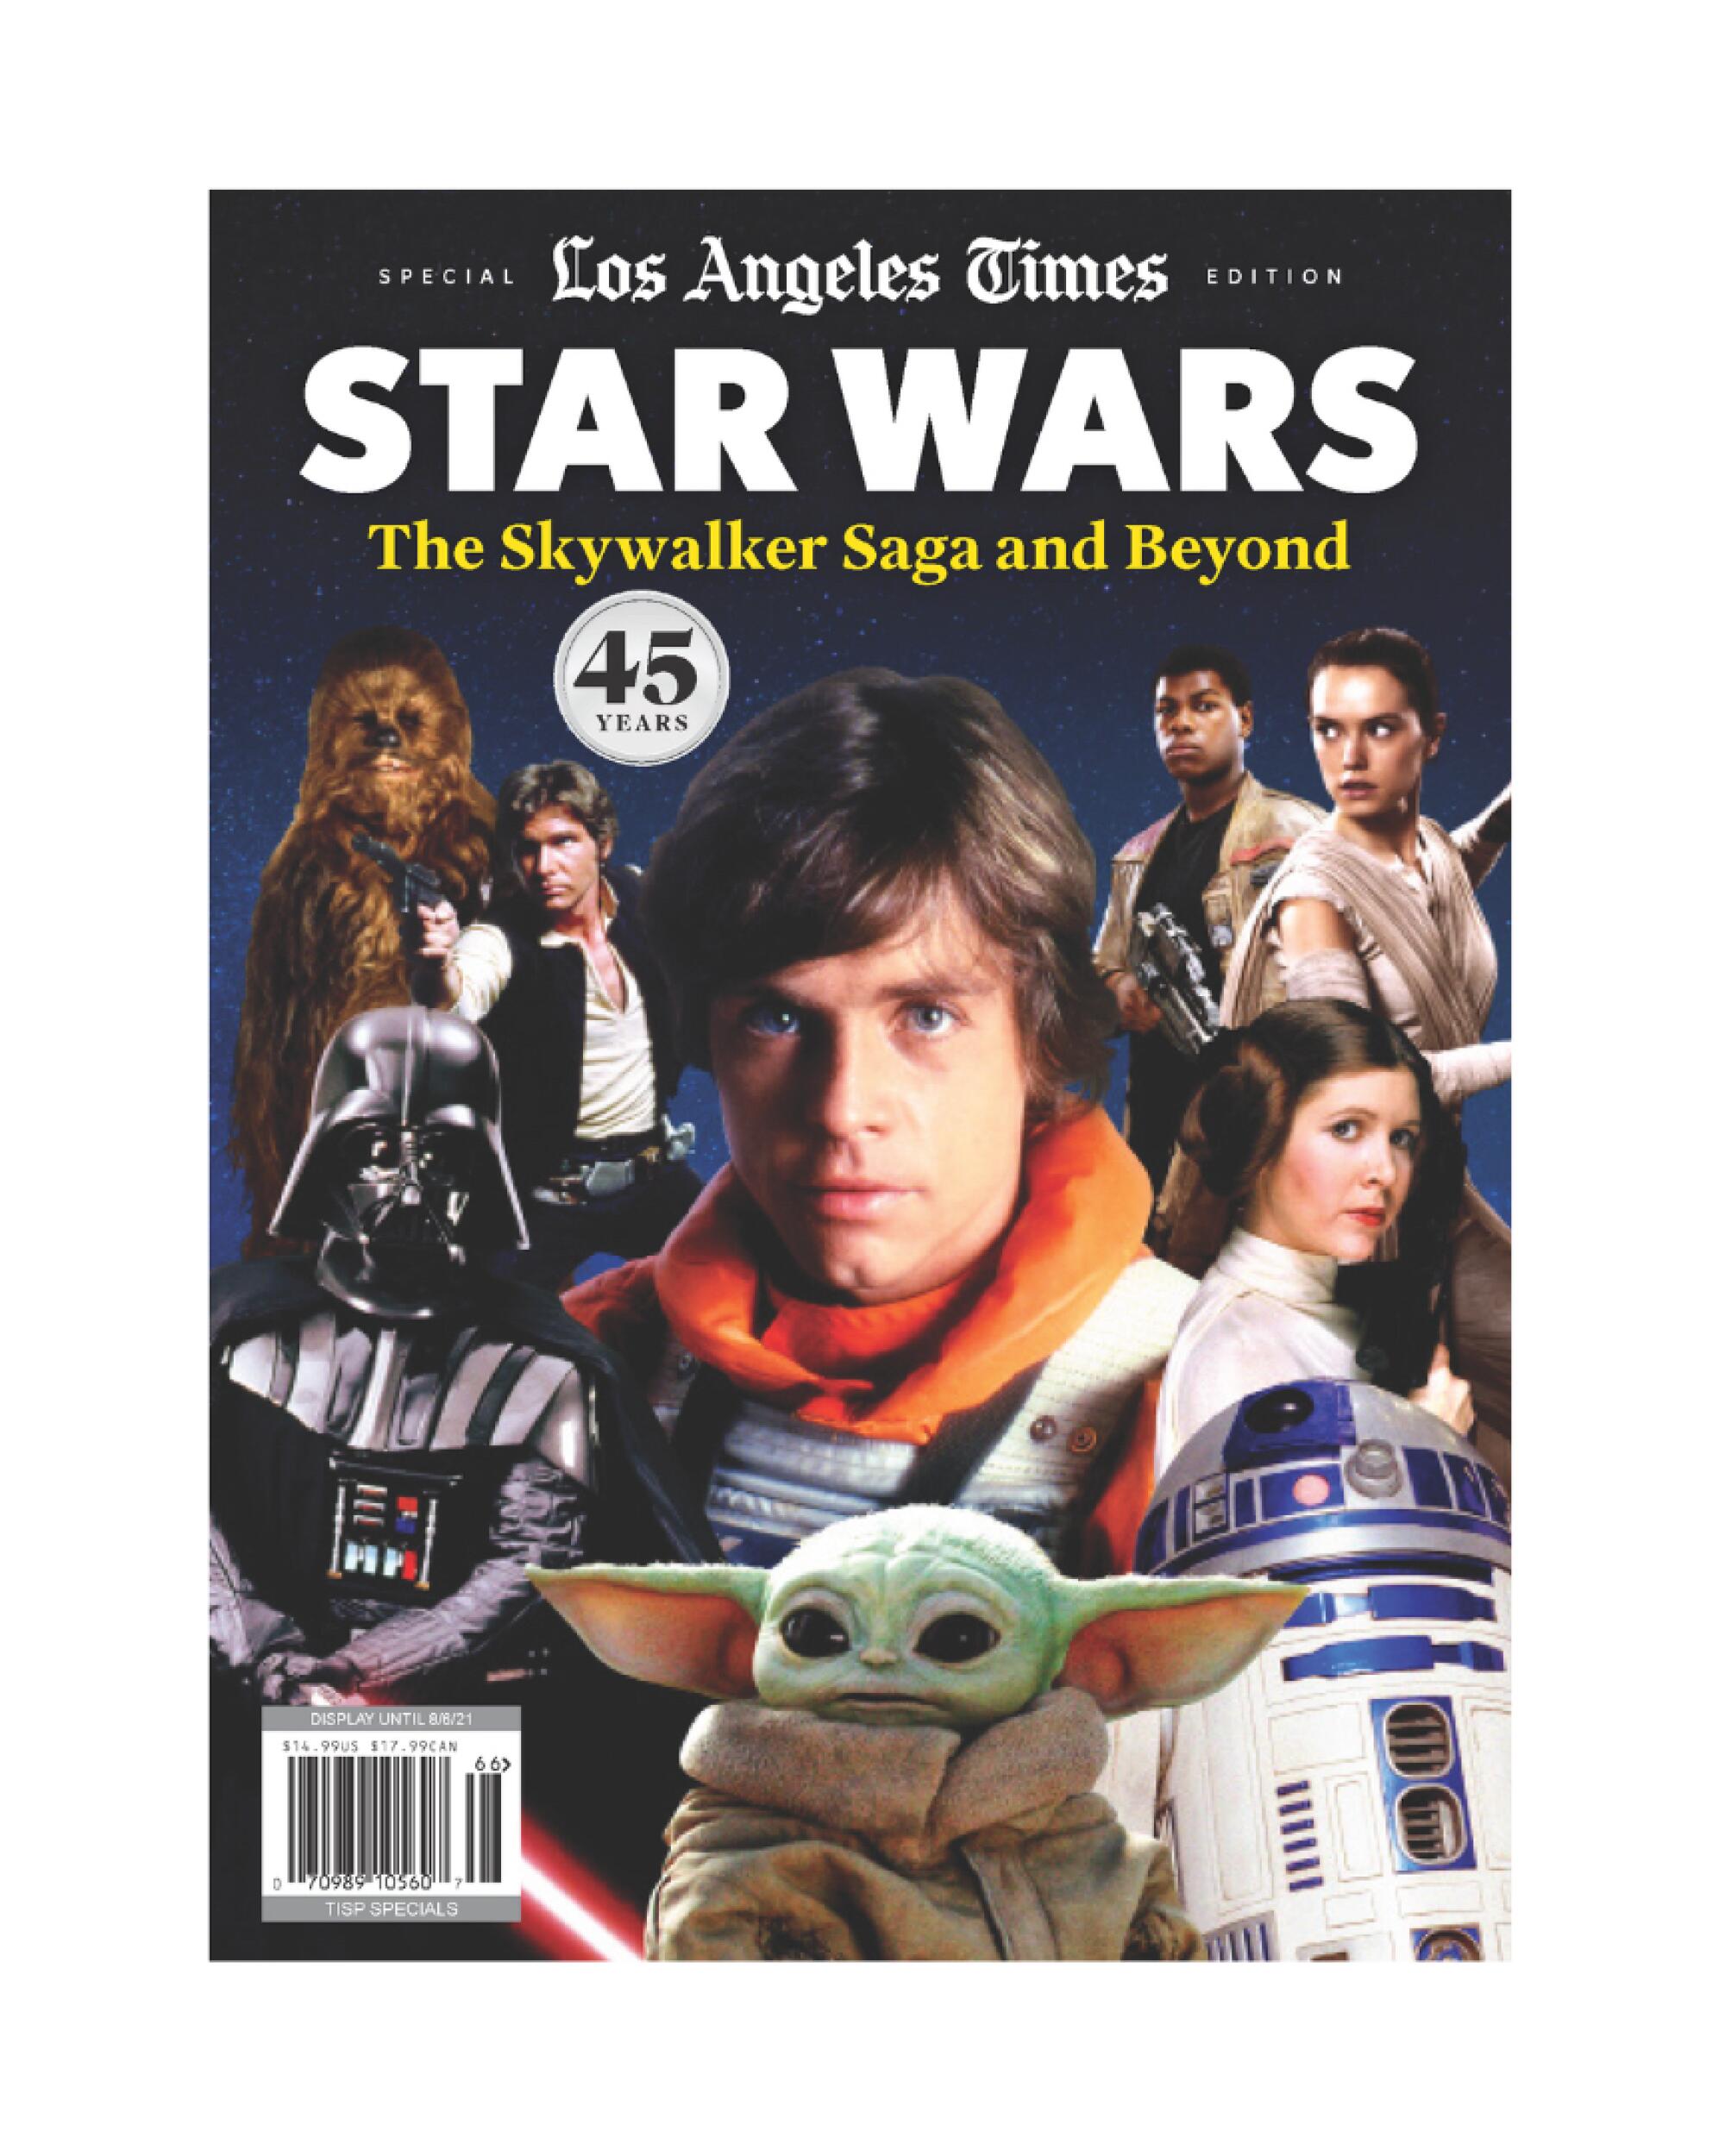 The Star Wars magazine by the best Los Angeles Times